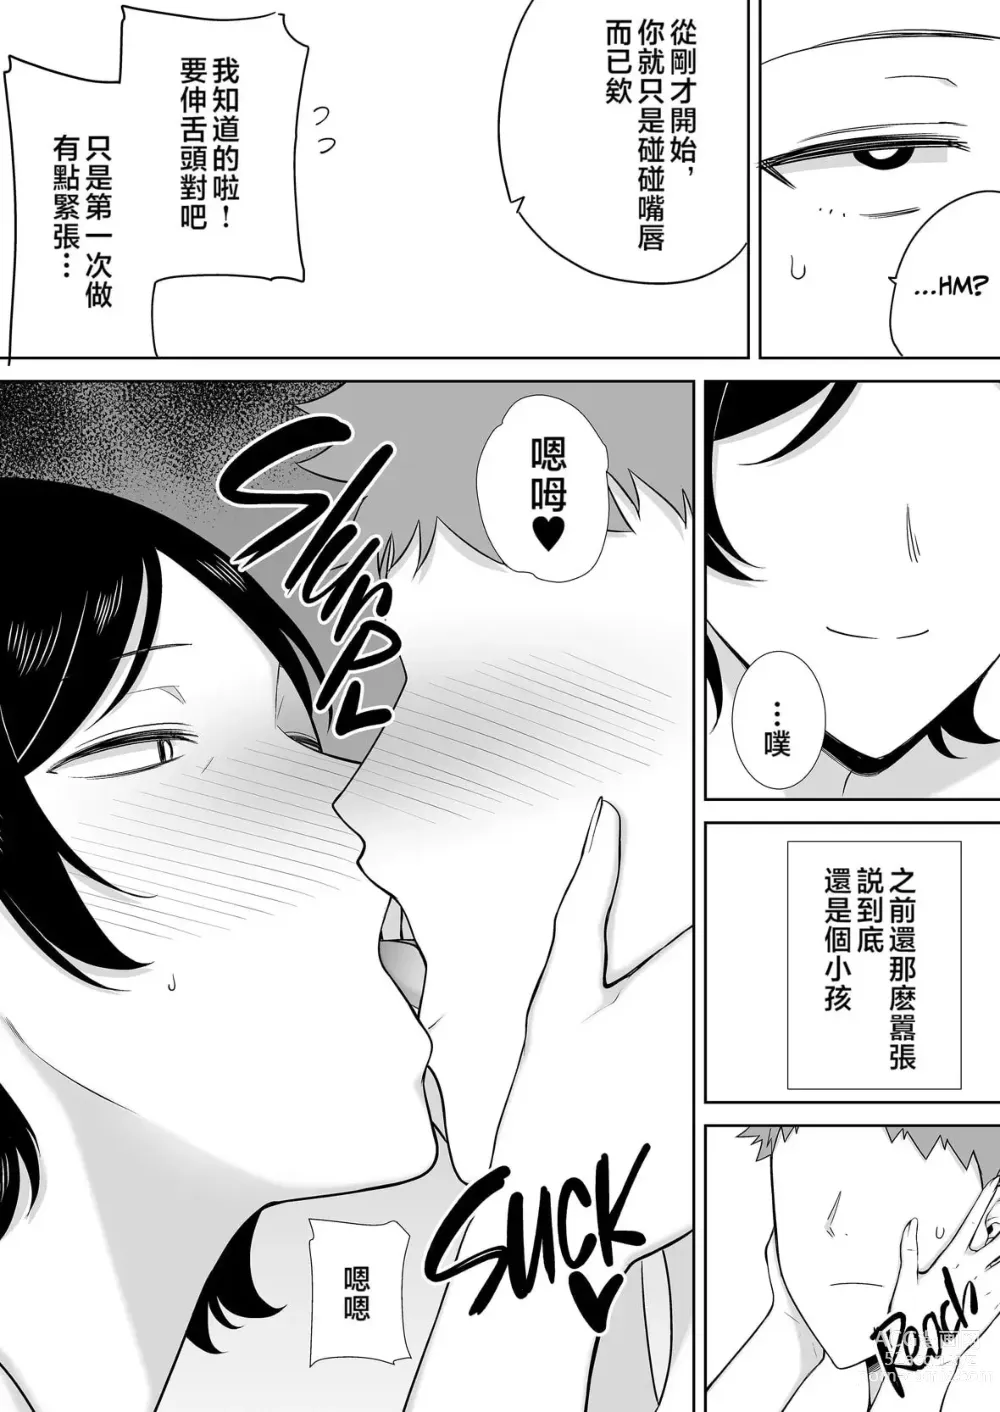 Page 23 of doujinshi even mom want a litle lovin